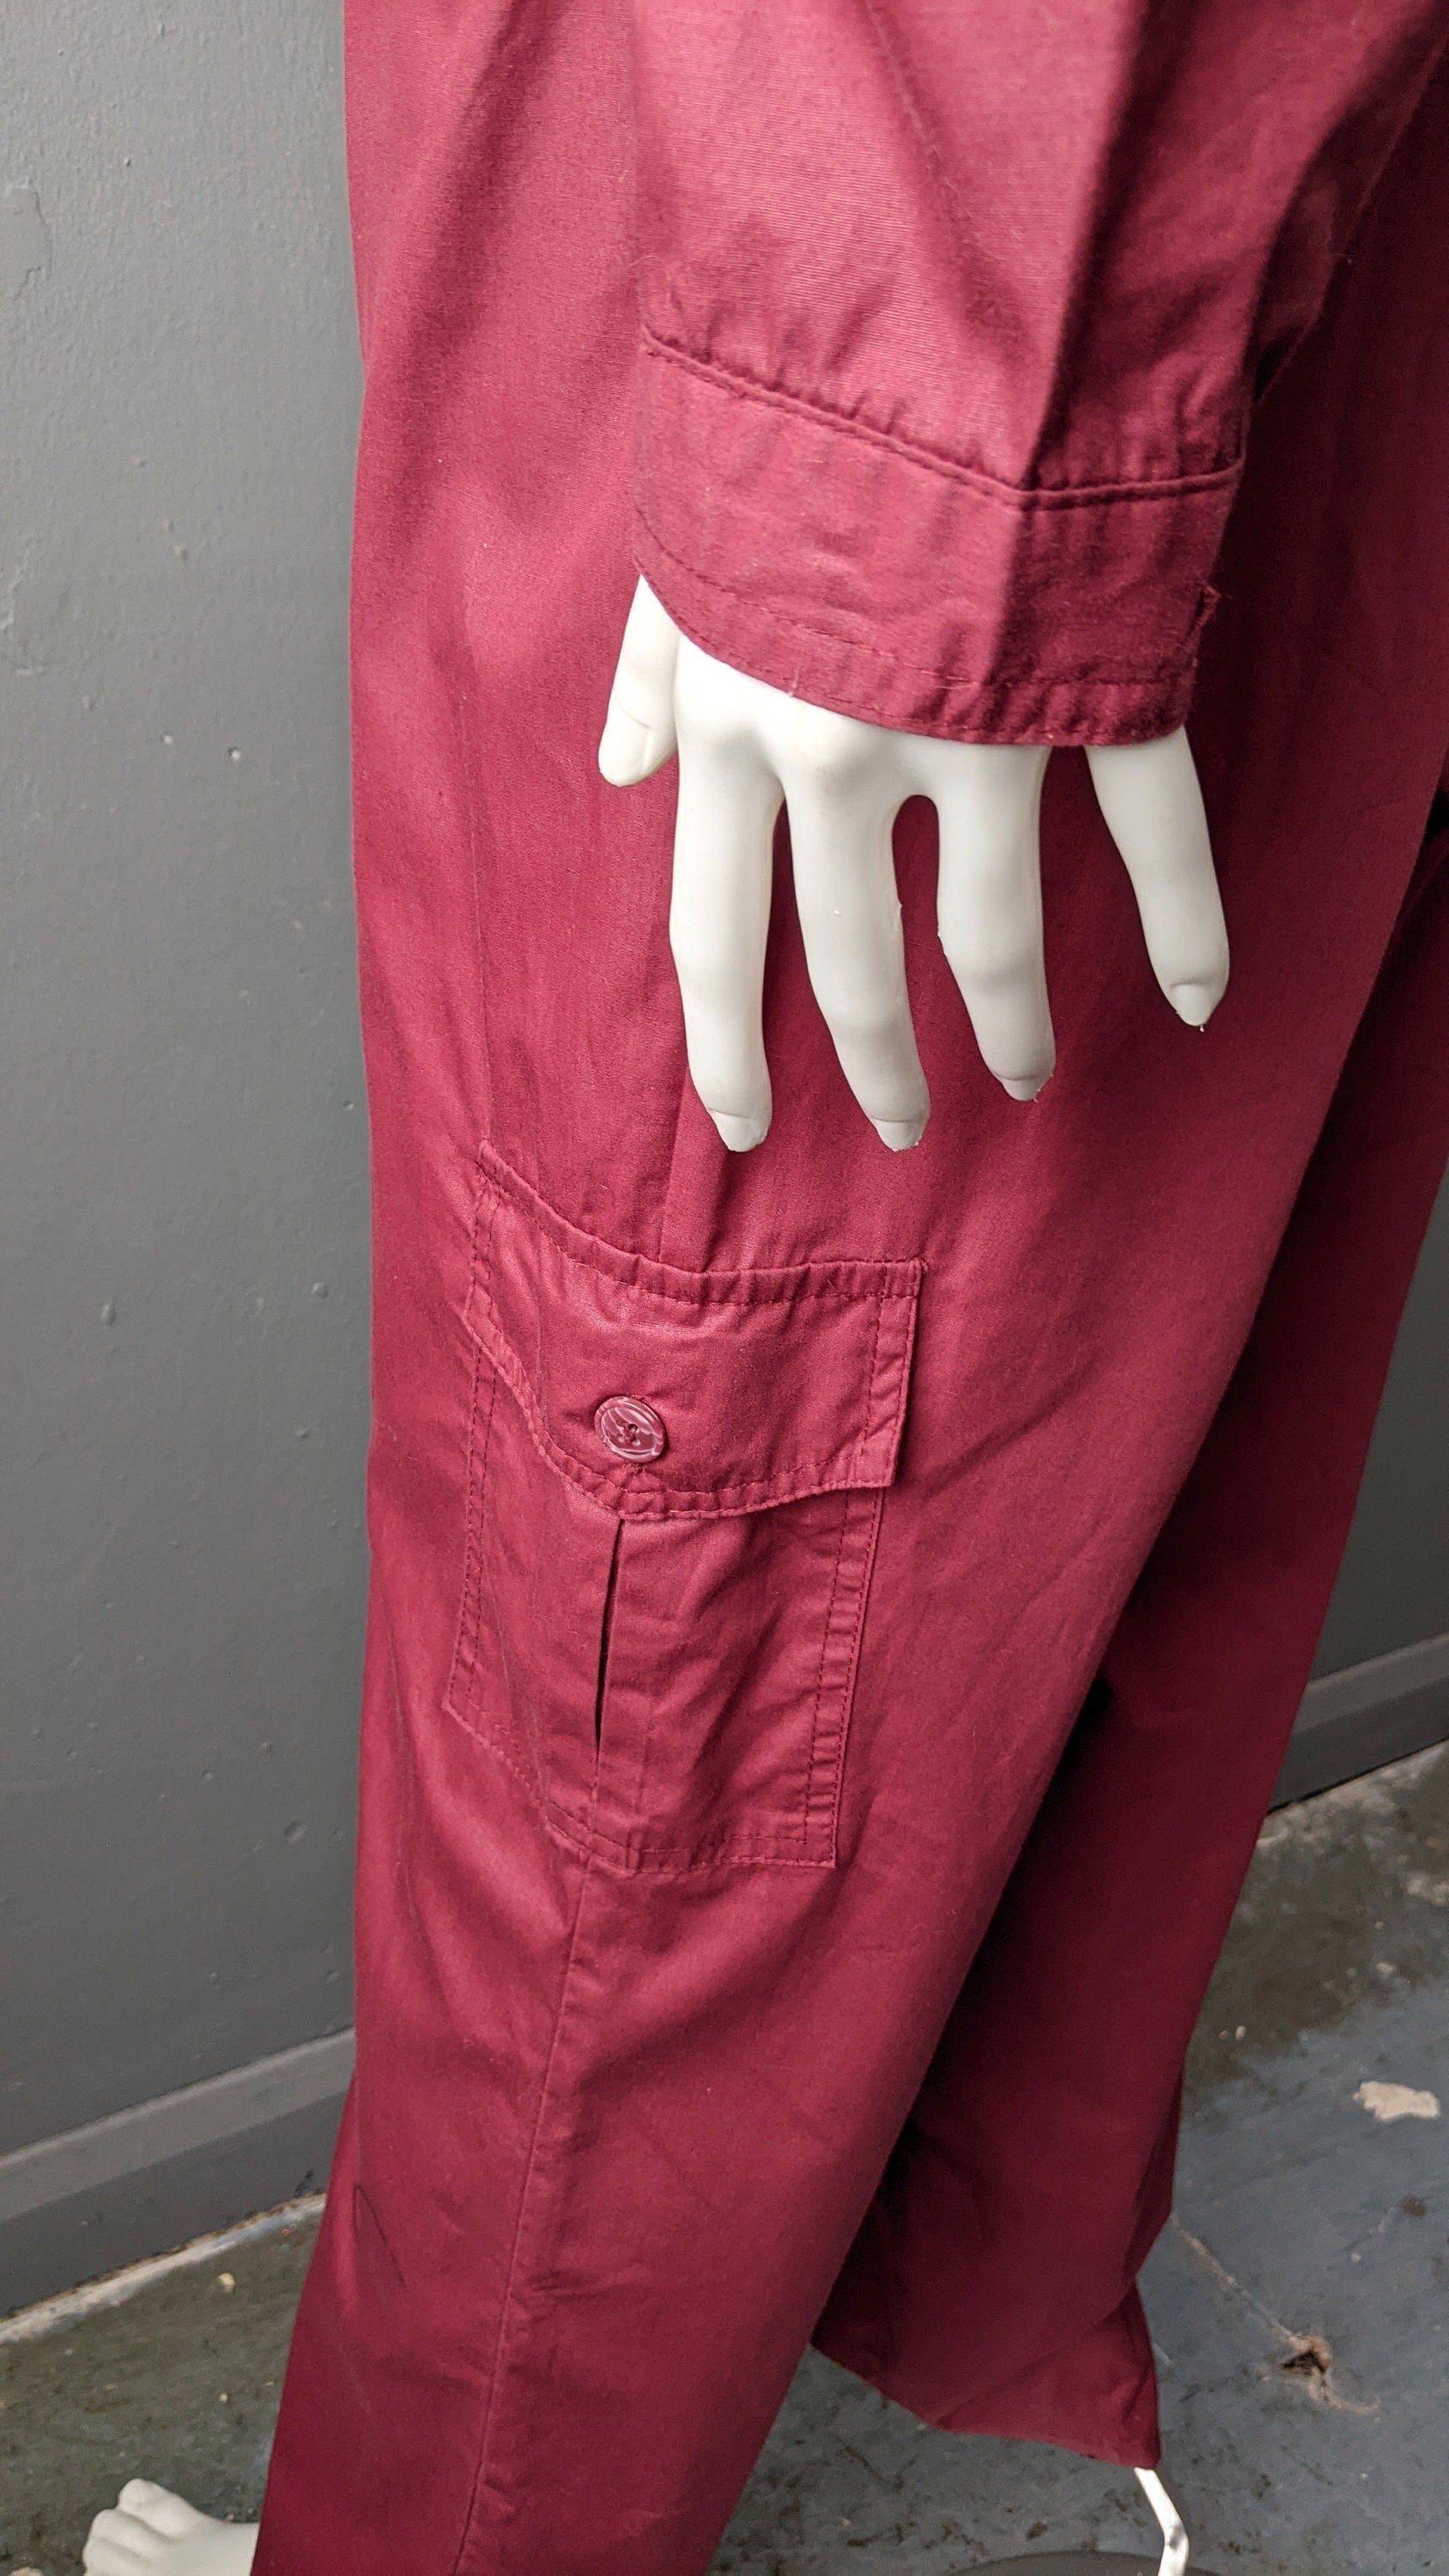 80s Utilitarian Jumpsuit, Burgundy Red Coveralls, Poly Cotton Zip Front Boilersuit, Size Large